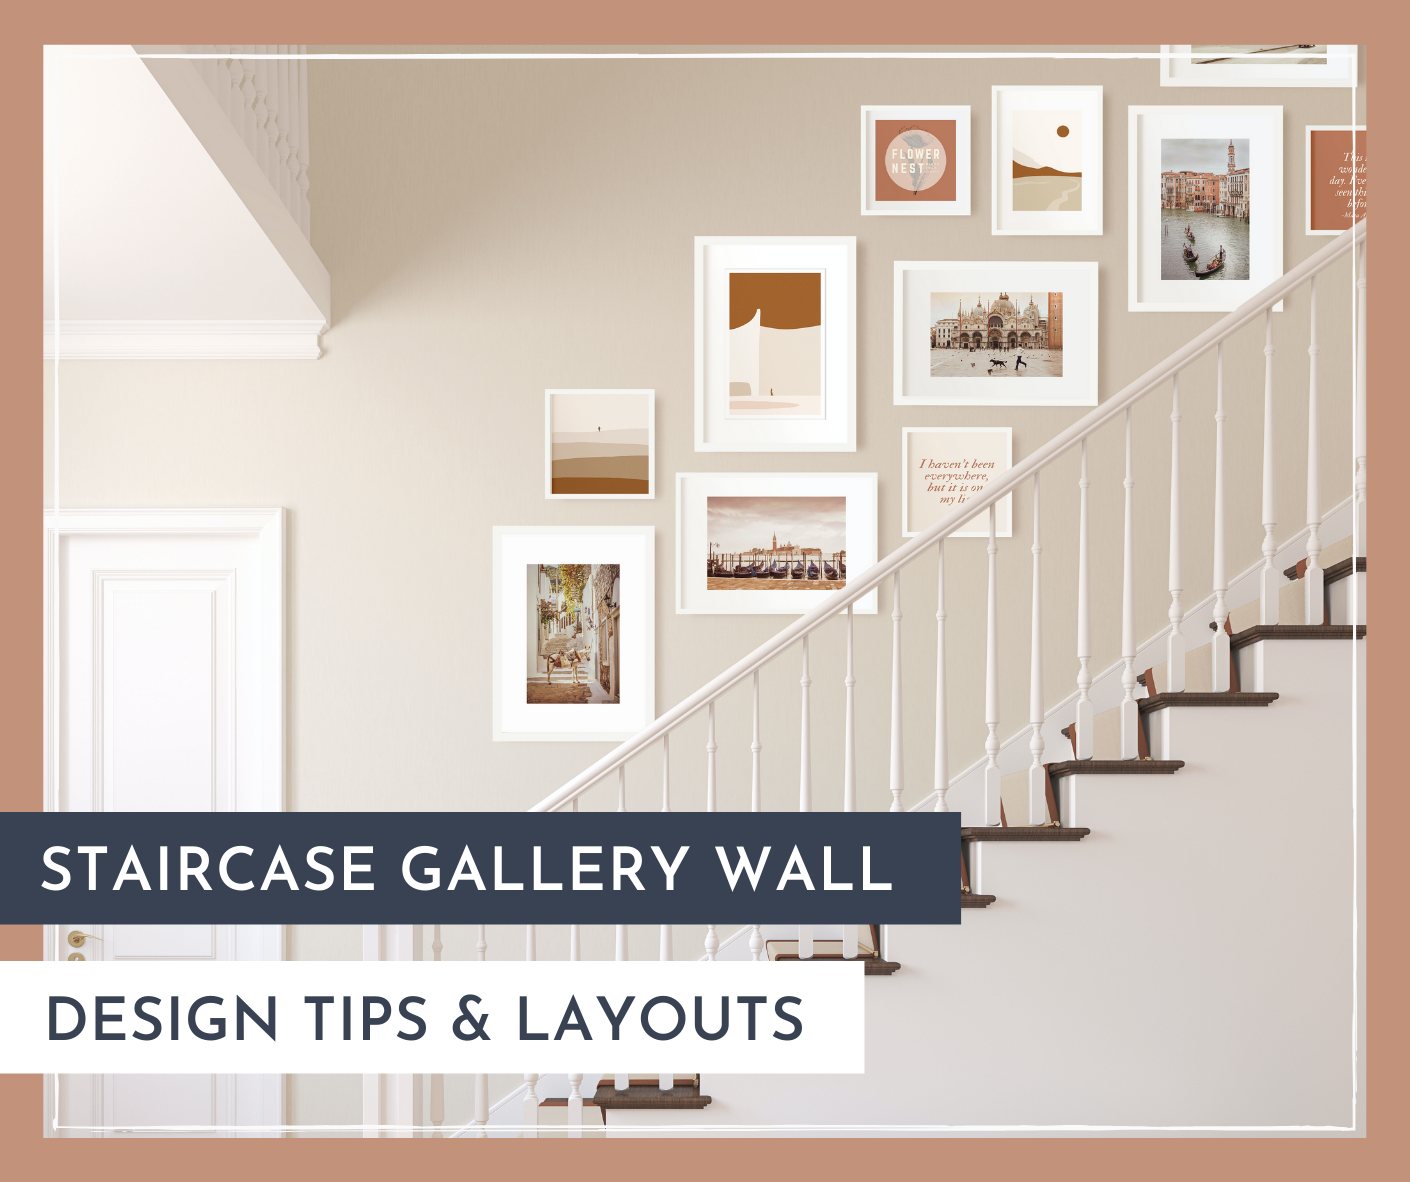 A Sophisticated Staircase Gallery Art Wall Template! - Laurel Home